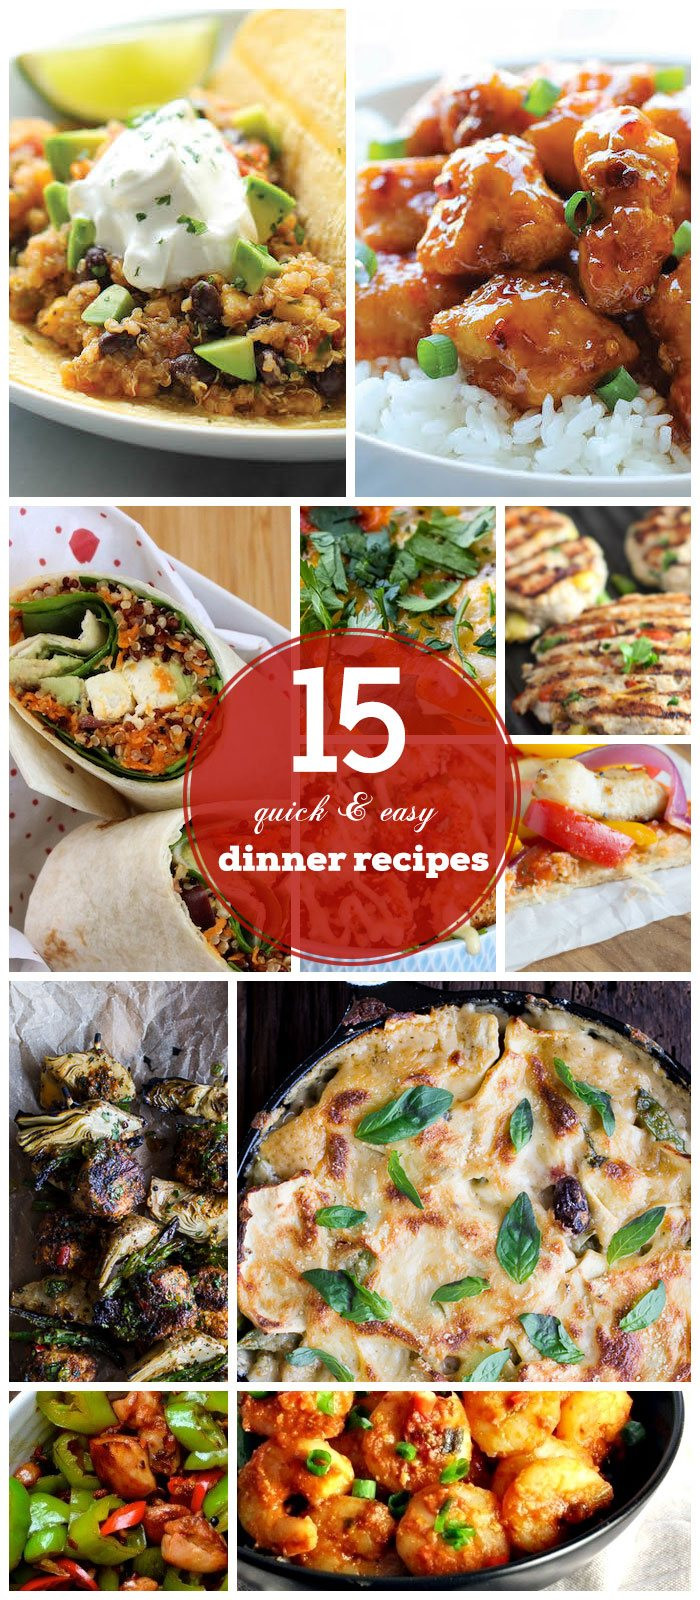 Quick And Easy Dinner Recipes For Families
 15 Quick & Easy Dinner Recipes for Family